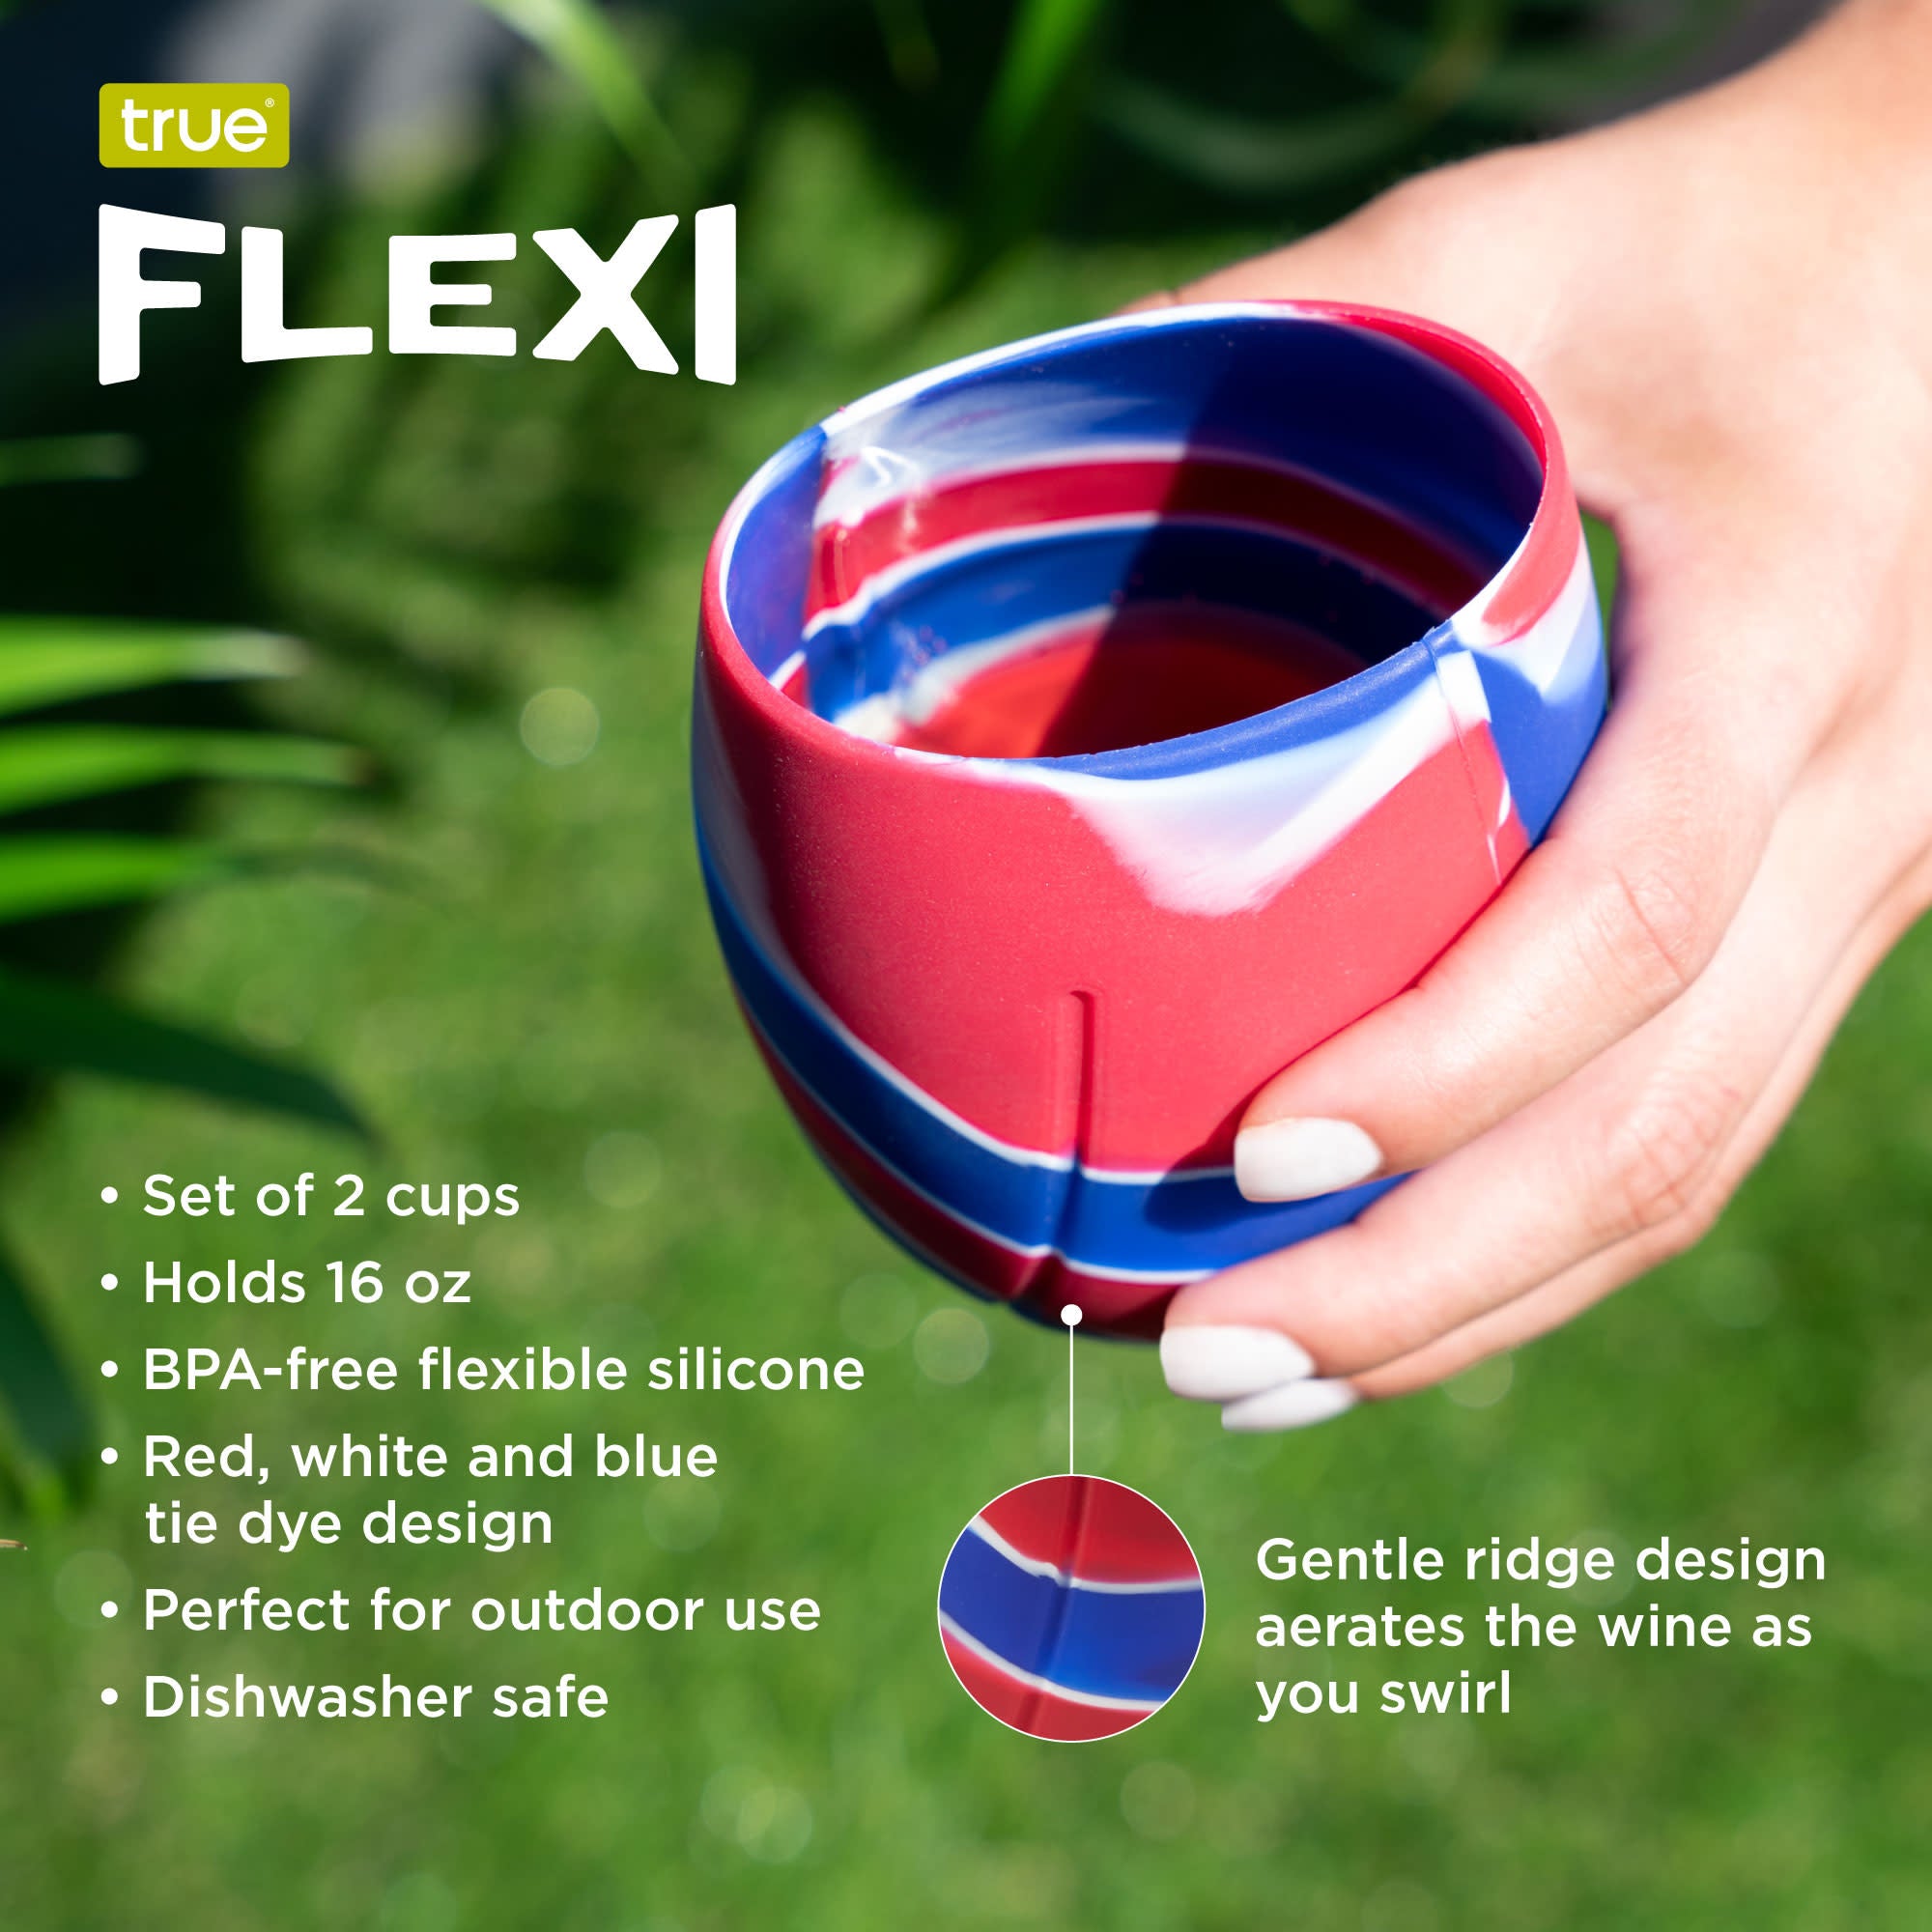 Flexi: Tie Dye Aerating Silicone Cups 2 Pack by True